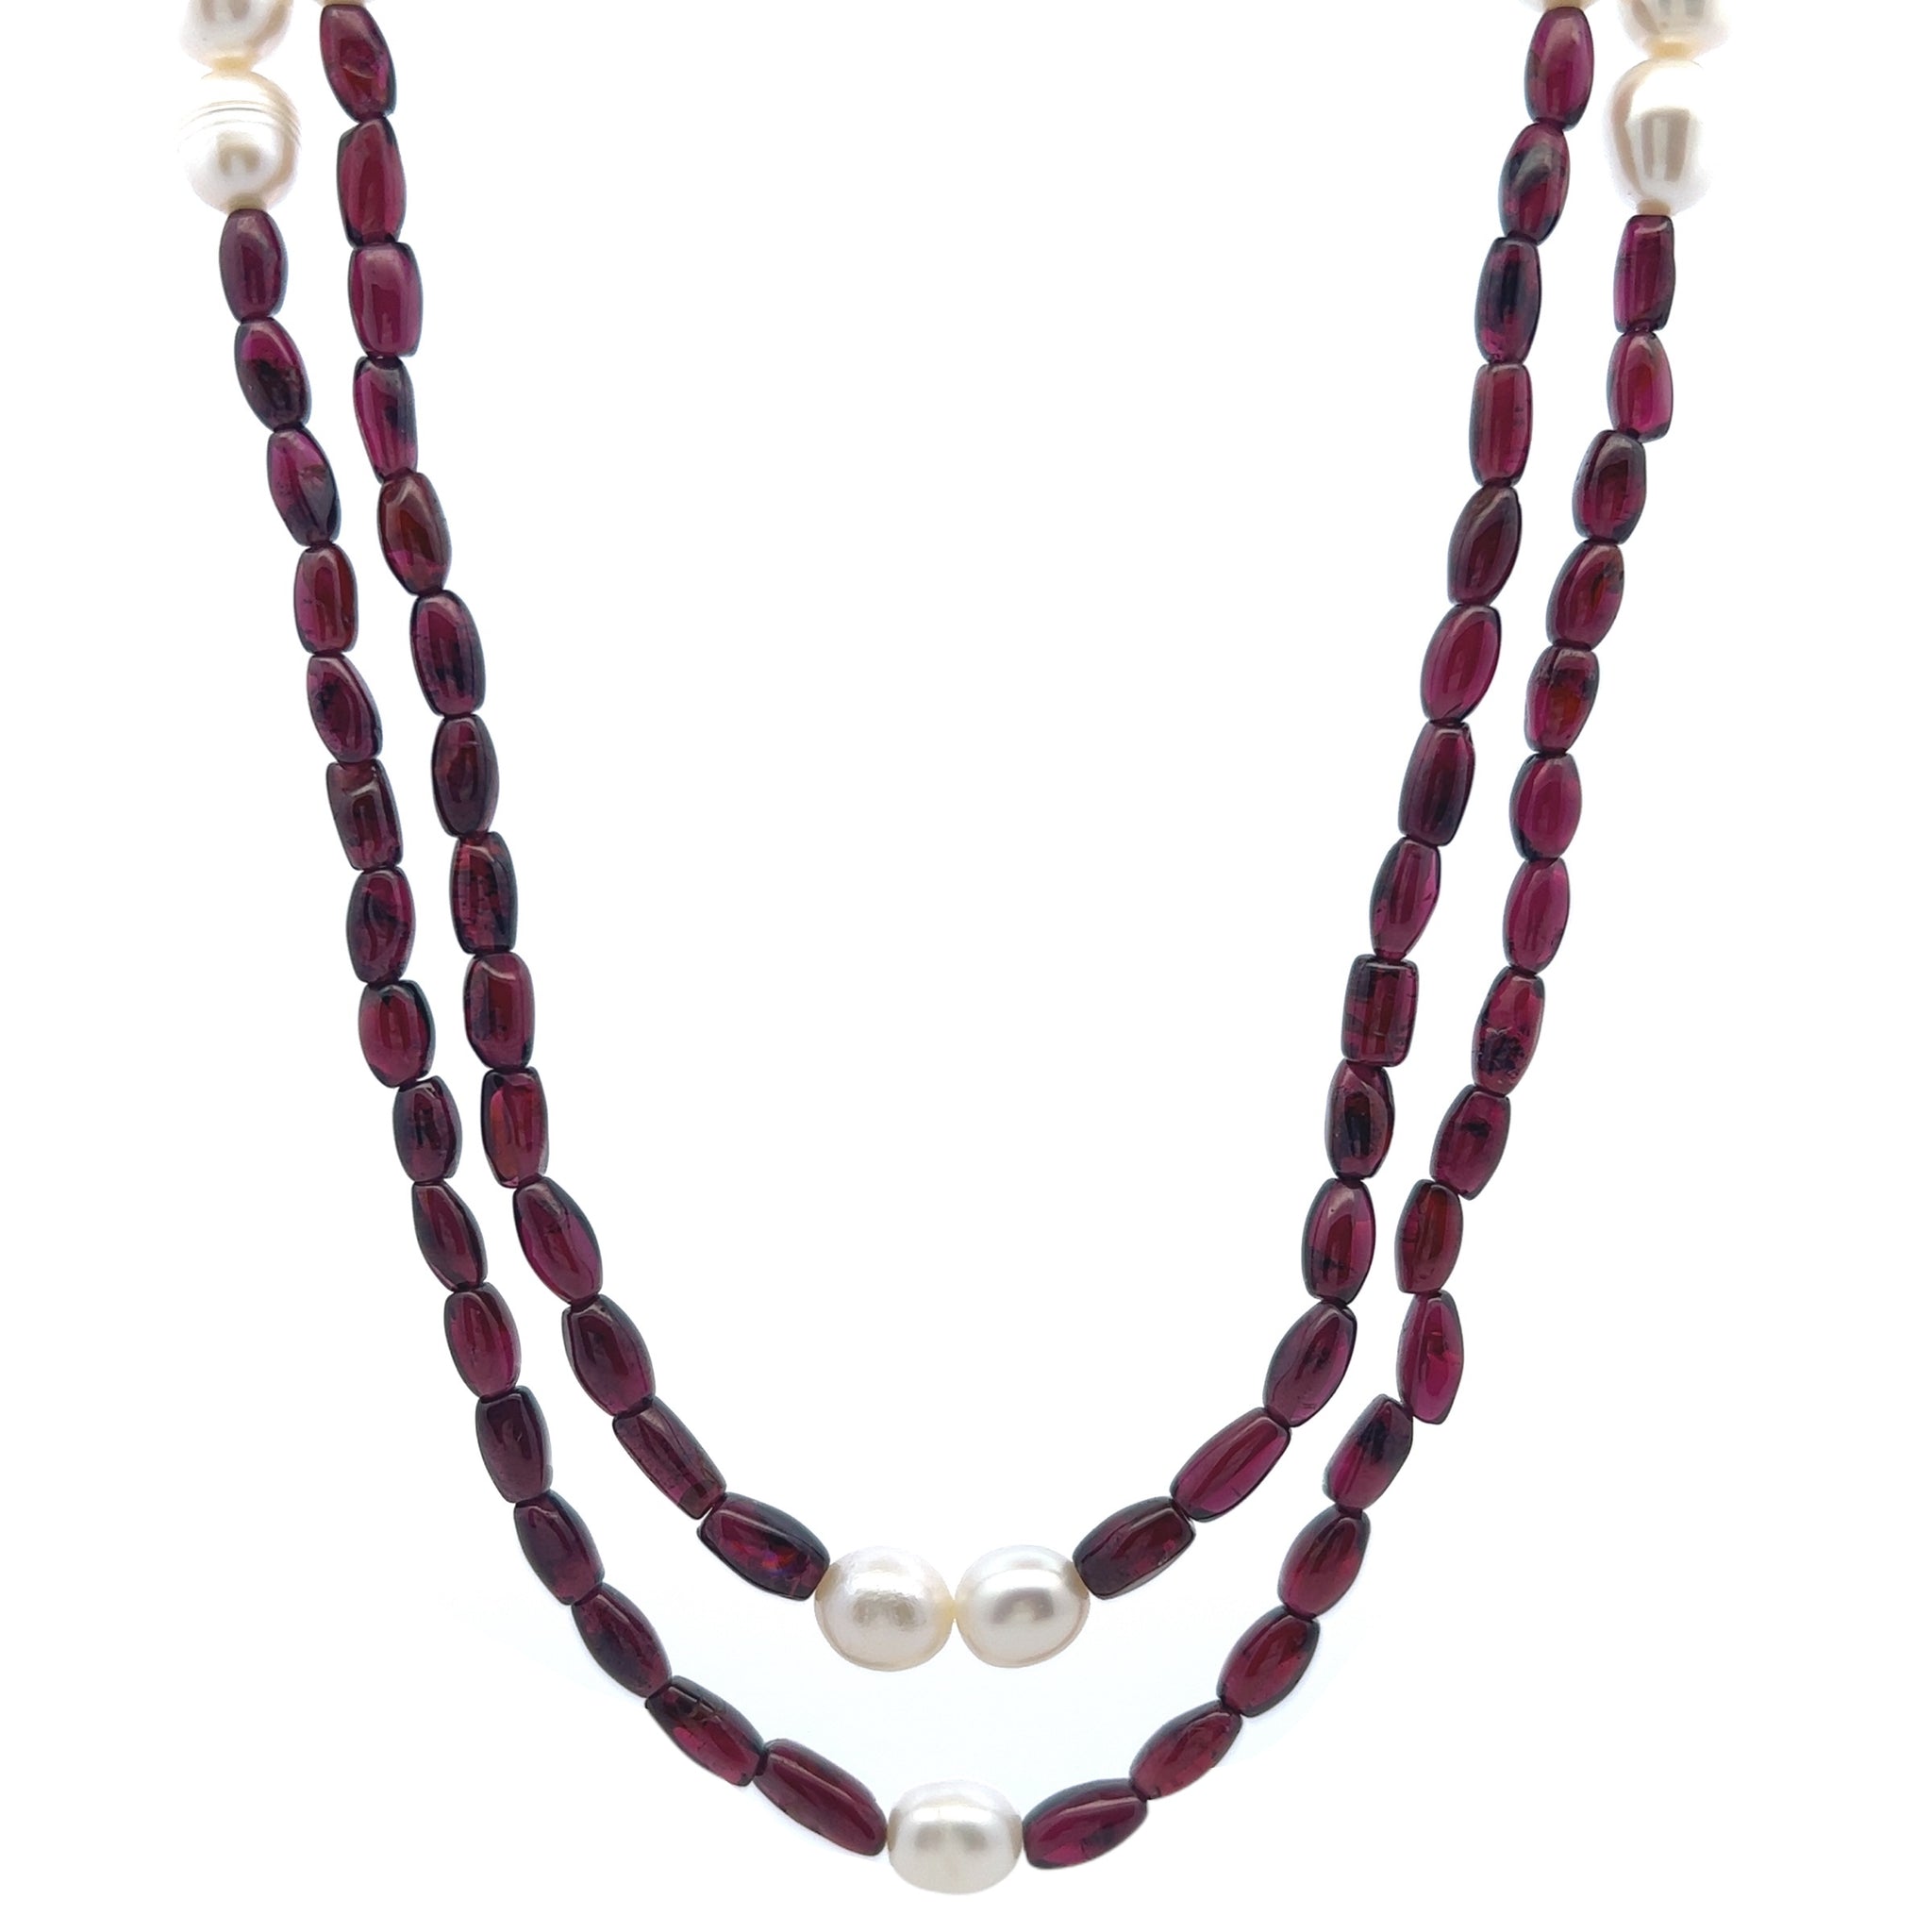 Natural Handmade Necklace 16"-18" Two Layer Garnet Pearls Gem Beads Jewellery